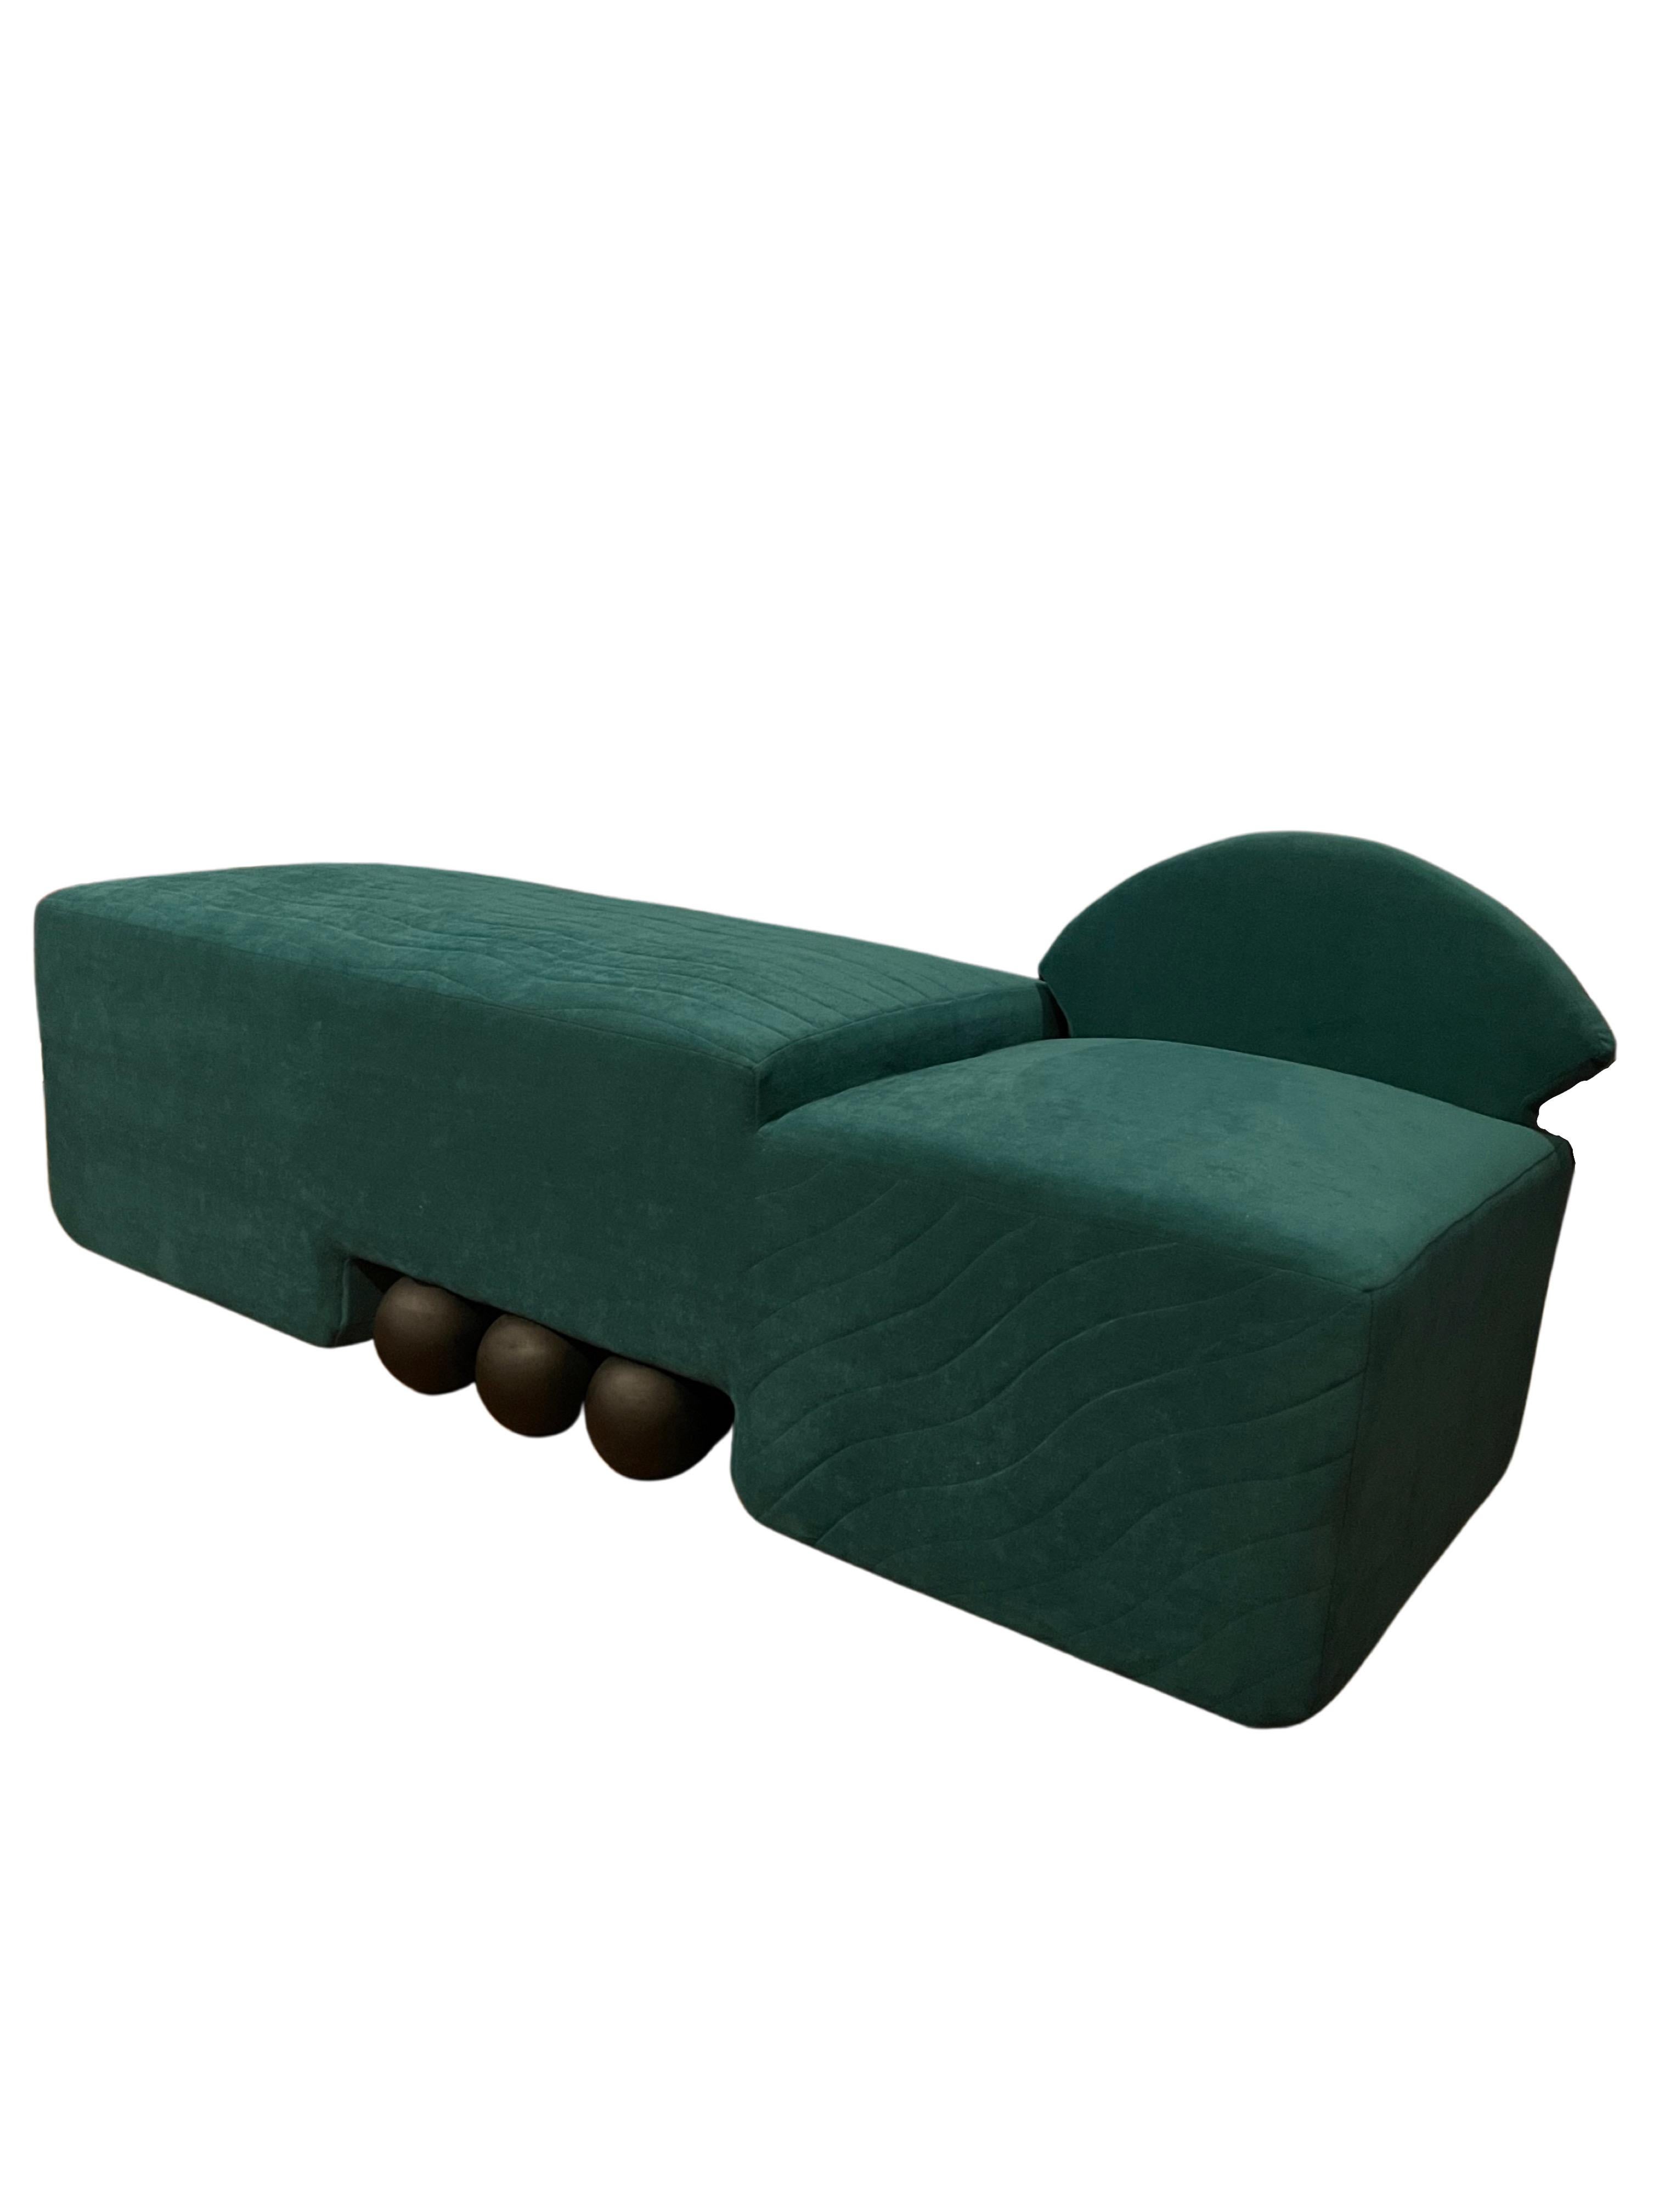 Three-Seat Modern Bench Sofa in Green Velvet Original Designed by RAG Home.

RAG under this brand, lies a strong picturesque construct with solid contemporary HOME ornaments. a delicate kind of mix materials arranged in artistic motifs the vision